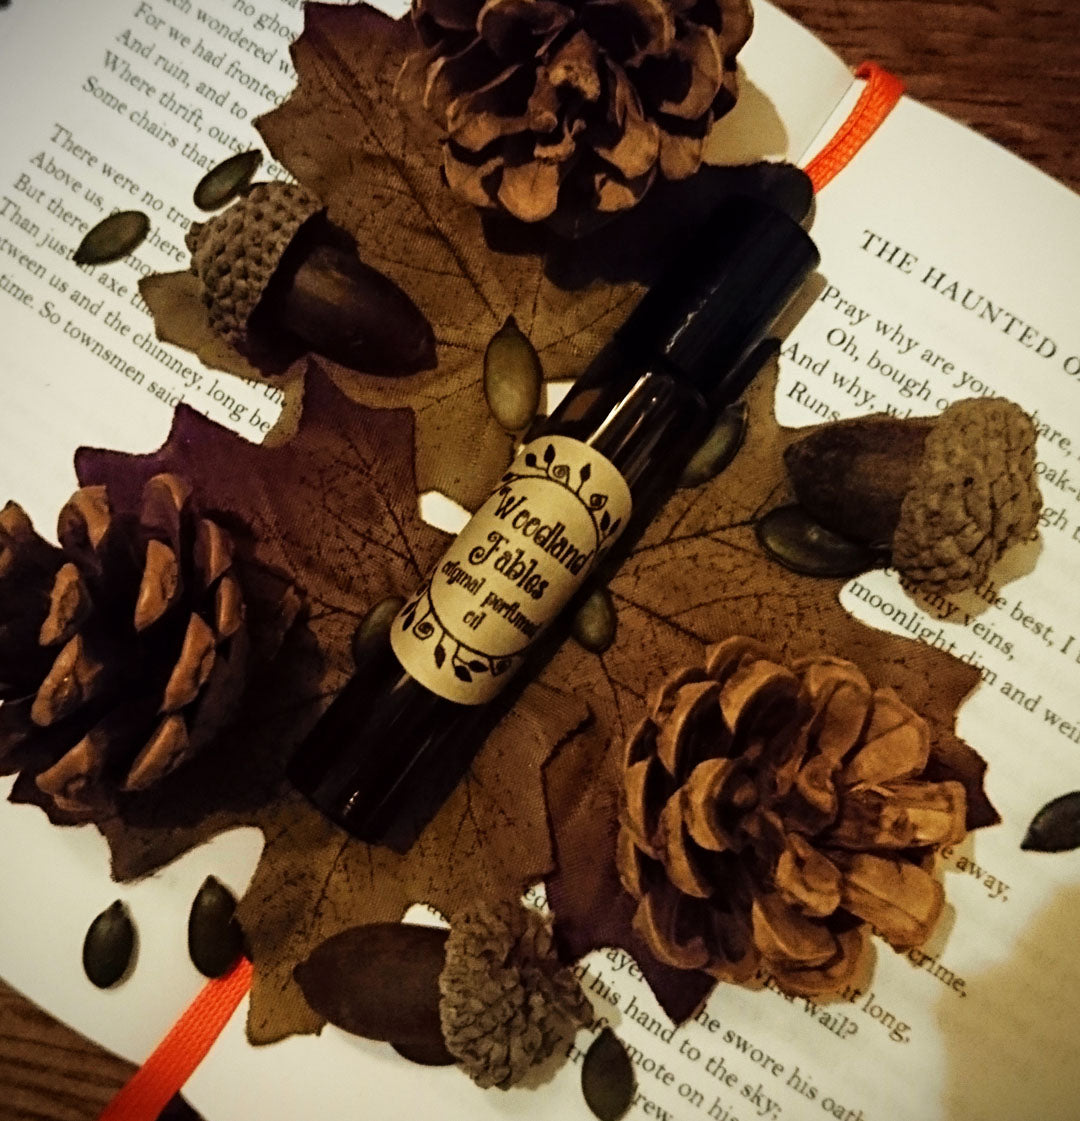 Woodland Fables Original Perfumed Oil - Autumn Winter Cosy Forest Library Roll On Fragrance - Old Books And Ancient Woods Vegan Oil Blend